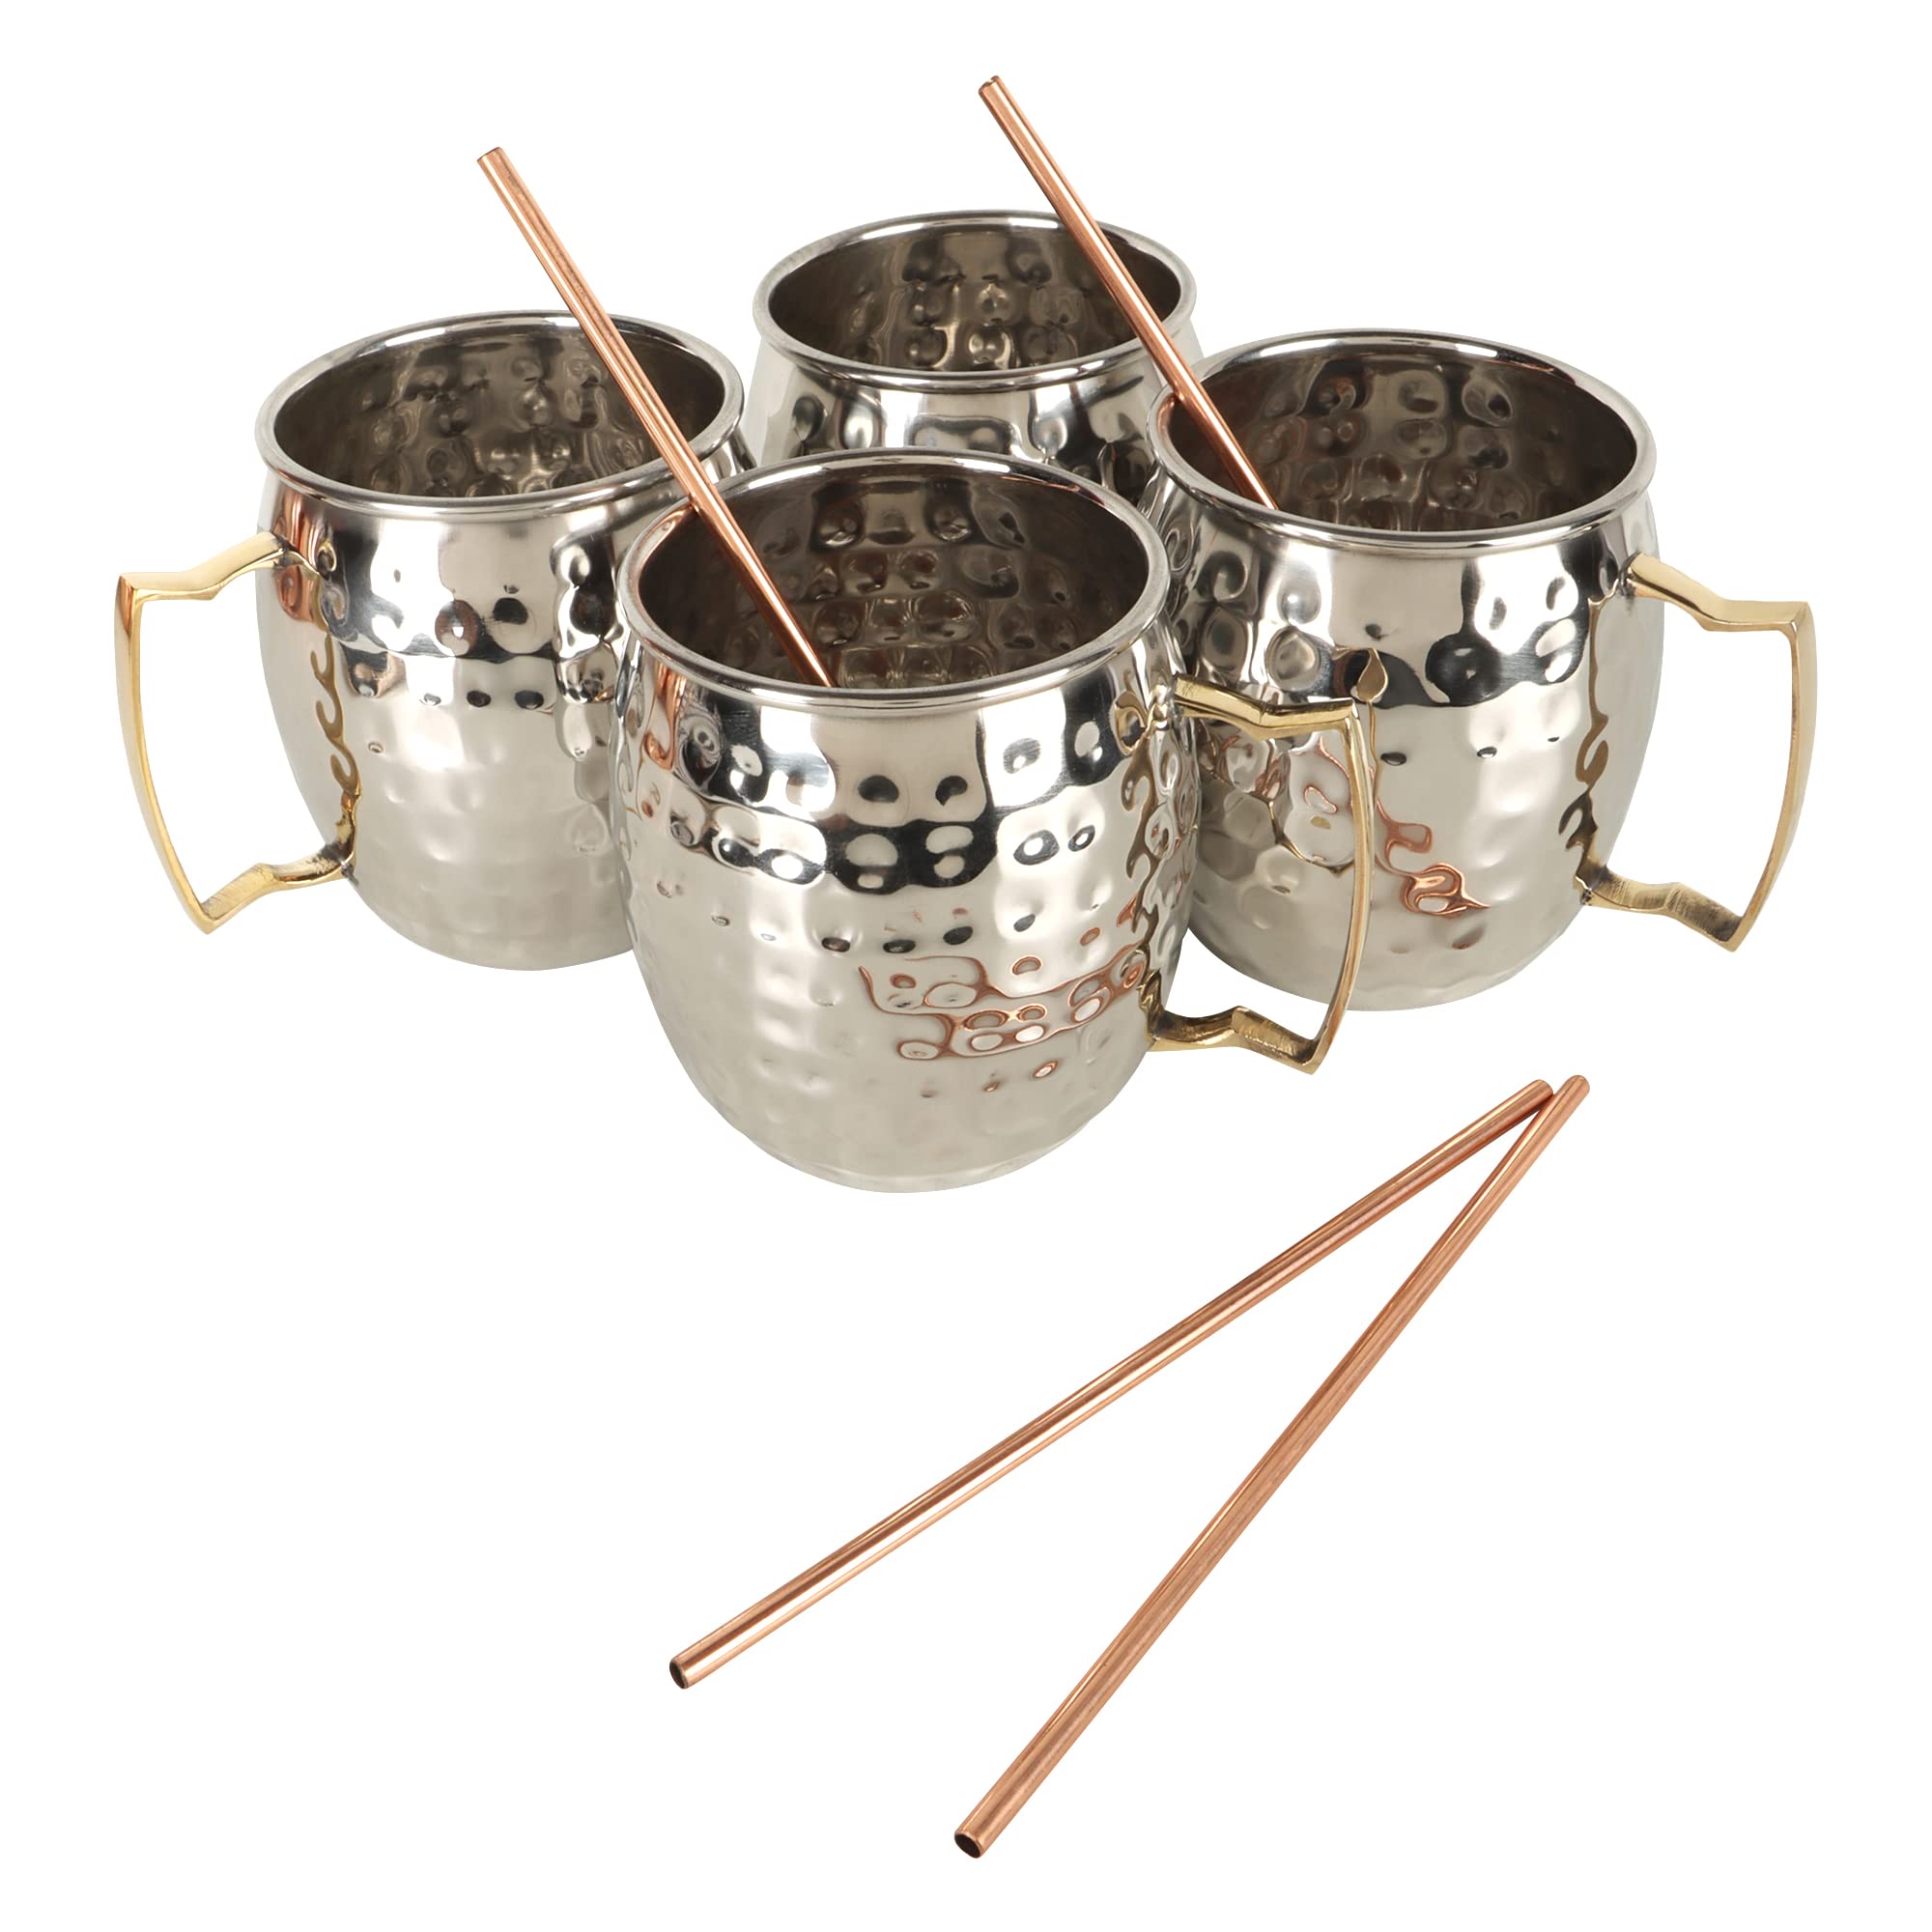 JYPR Complete Moscow Mule Mugs 8pc Set - Large 18oz Hammered Steel Mugs with Gold Brass Handles - Includes 4X Copper Straws - Food Grade Safe Steel Interior